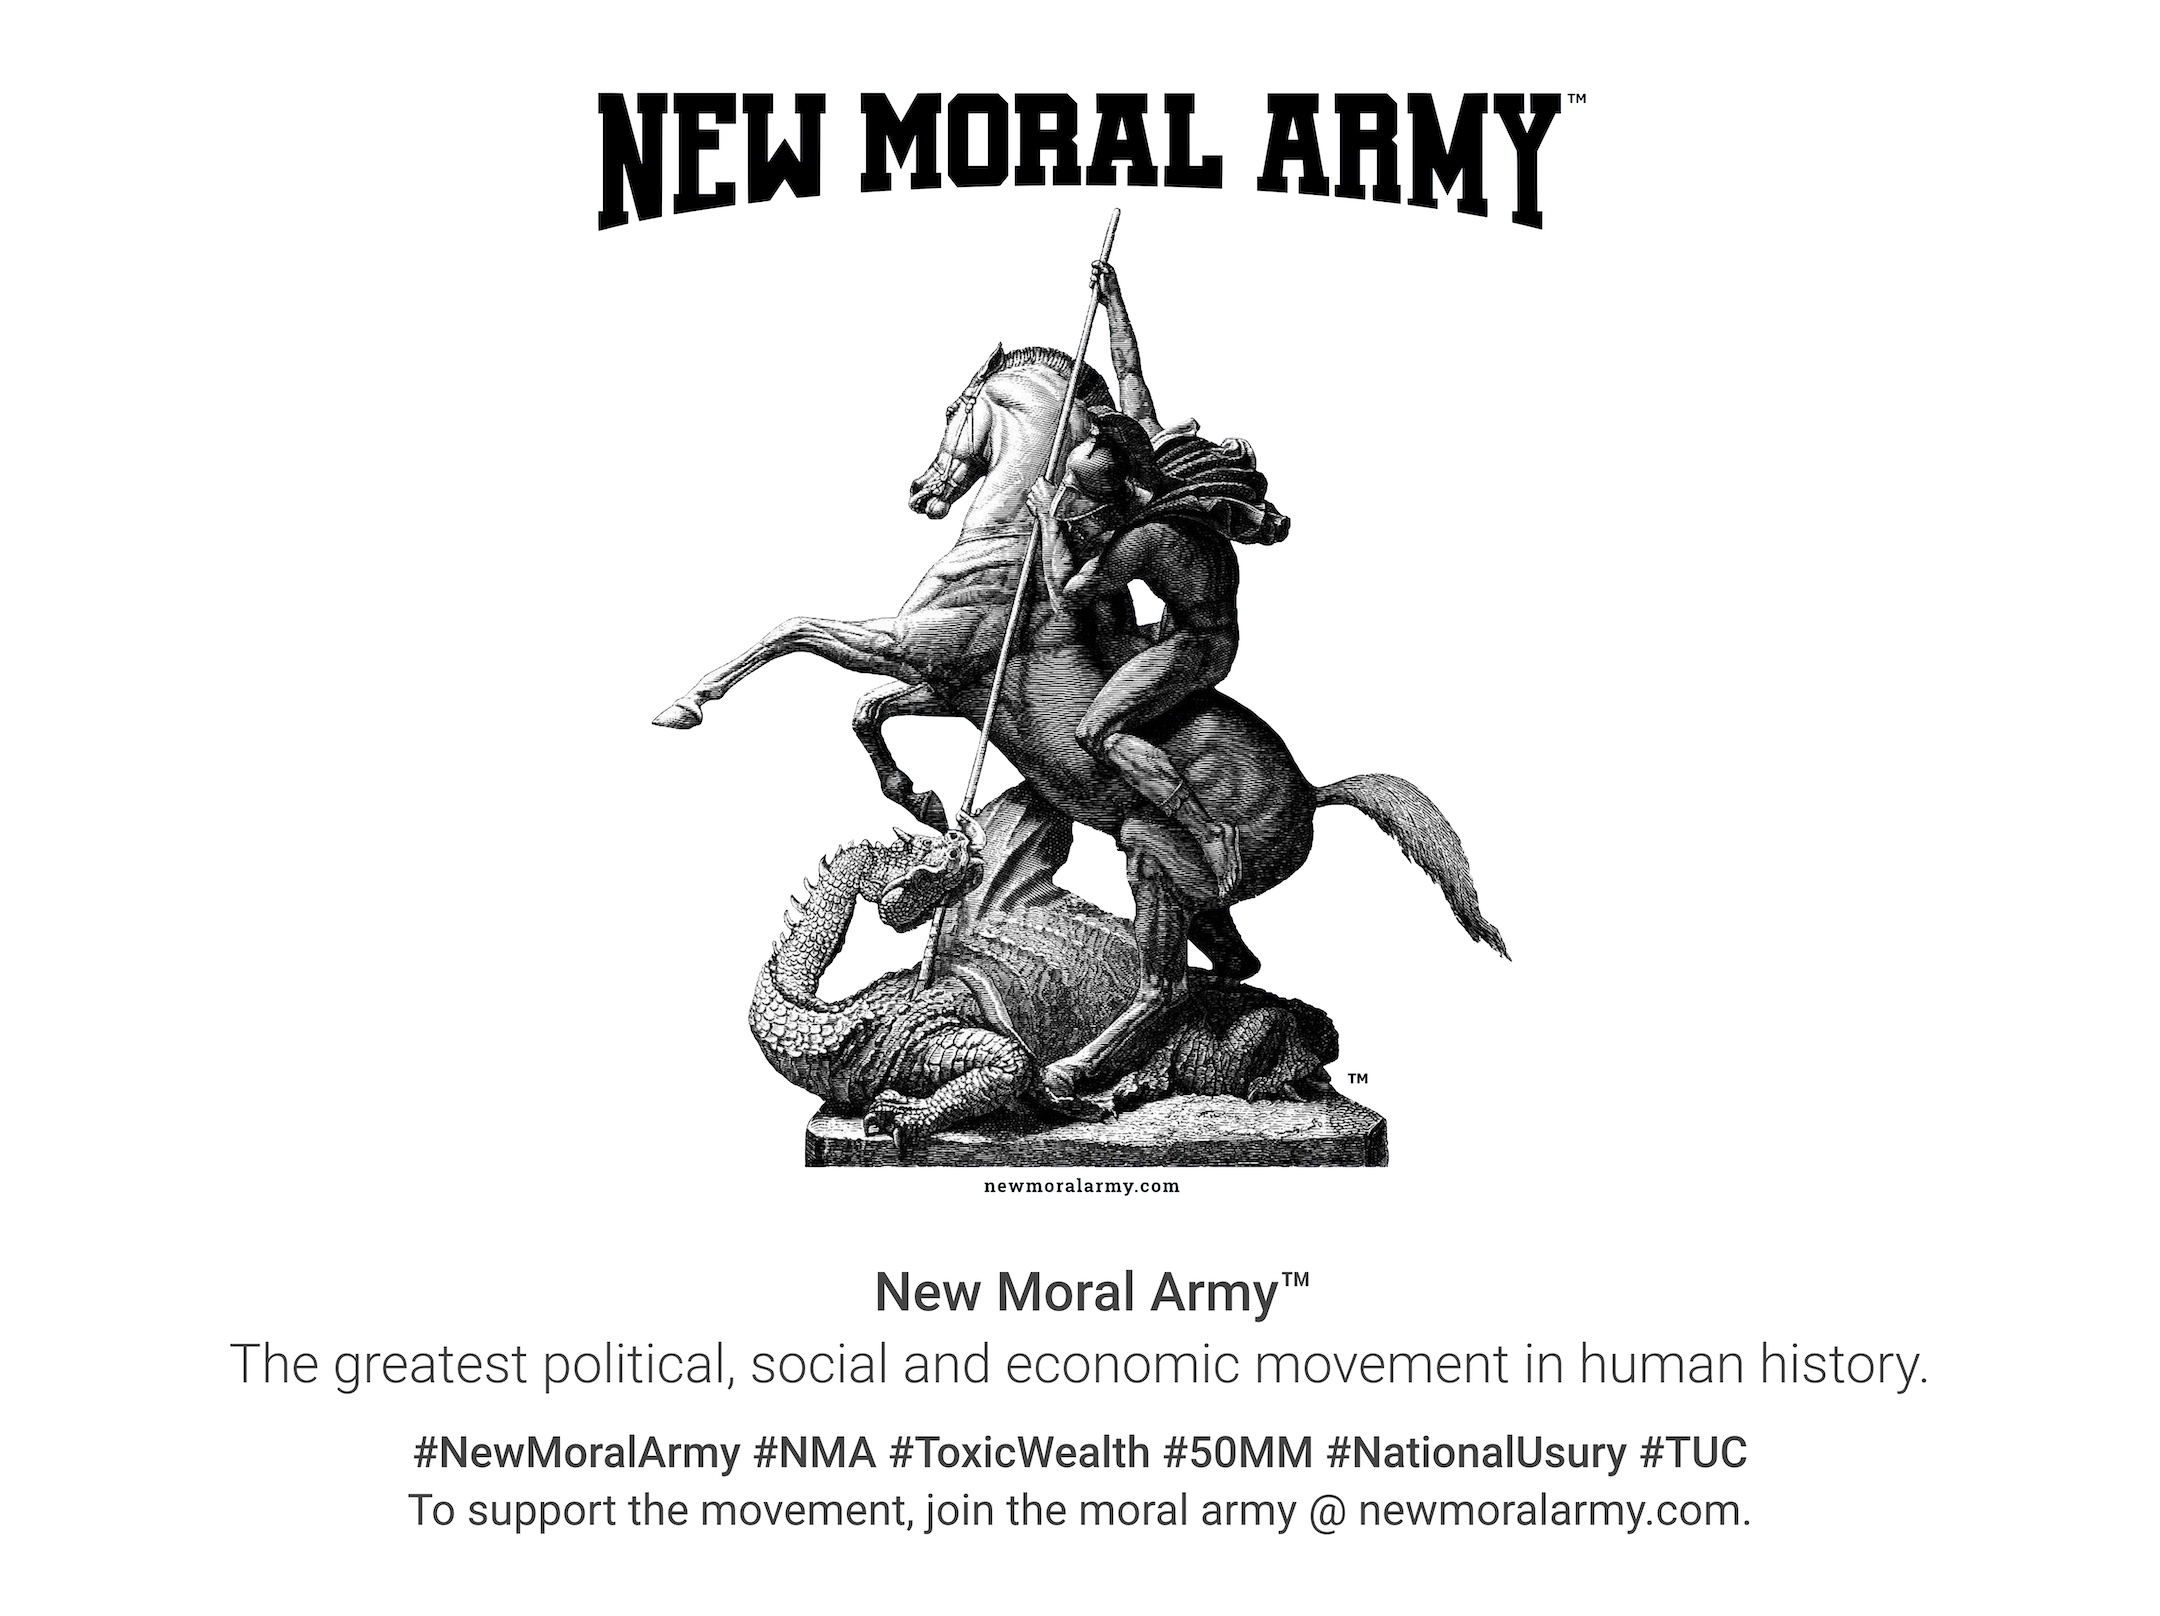 New Moral Army™ - The greatest political, social and economic movement in human history. #NewMoralArmy #NMA #ToxicWealth #50MM #NationalUsury #TUC. To support the movement, join the moral army @ newmoralarmy.com.